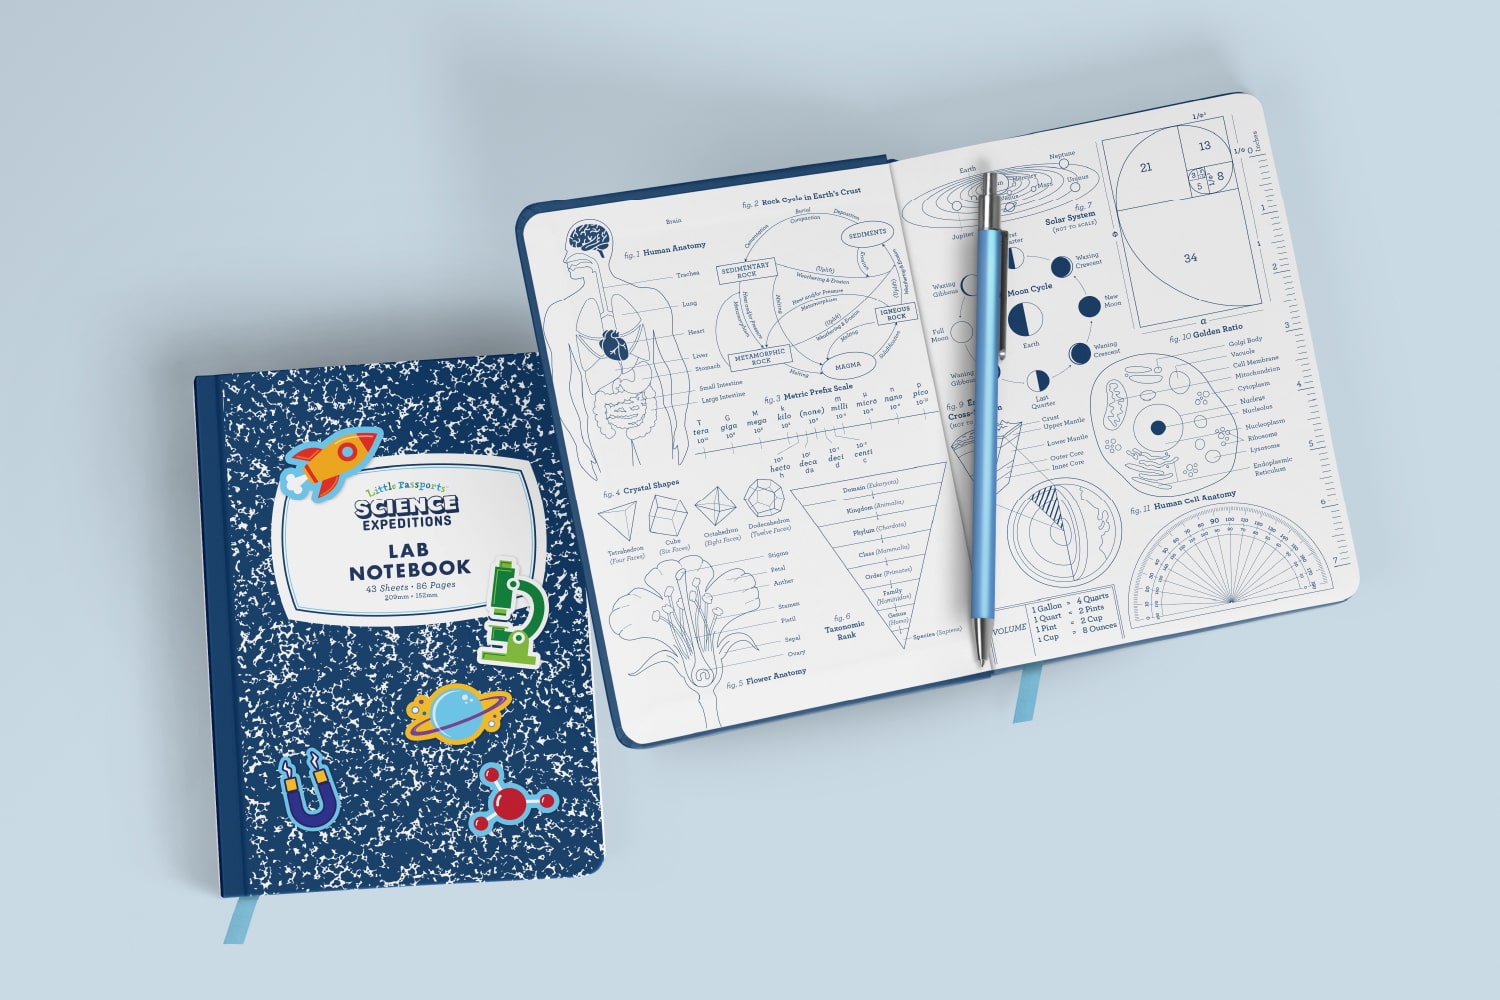 Little Passports Science Expedition Lab Notebook designed by Juli Shore Design.